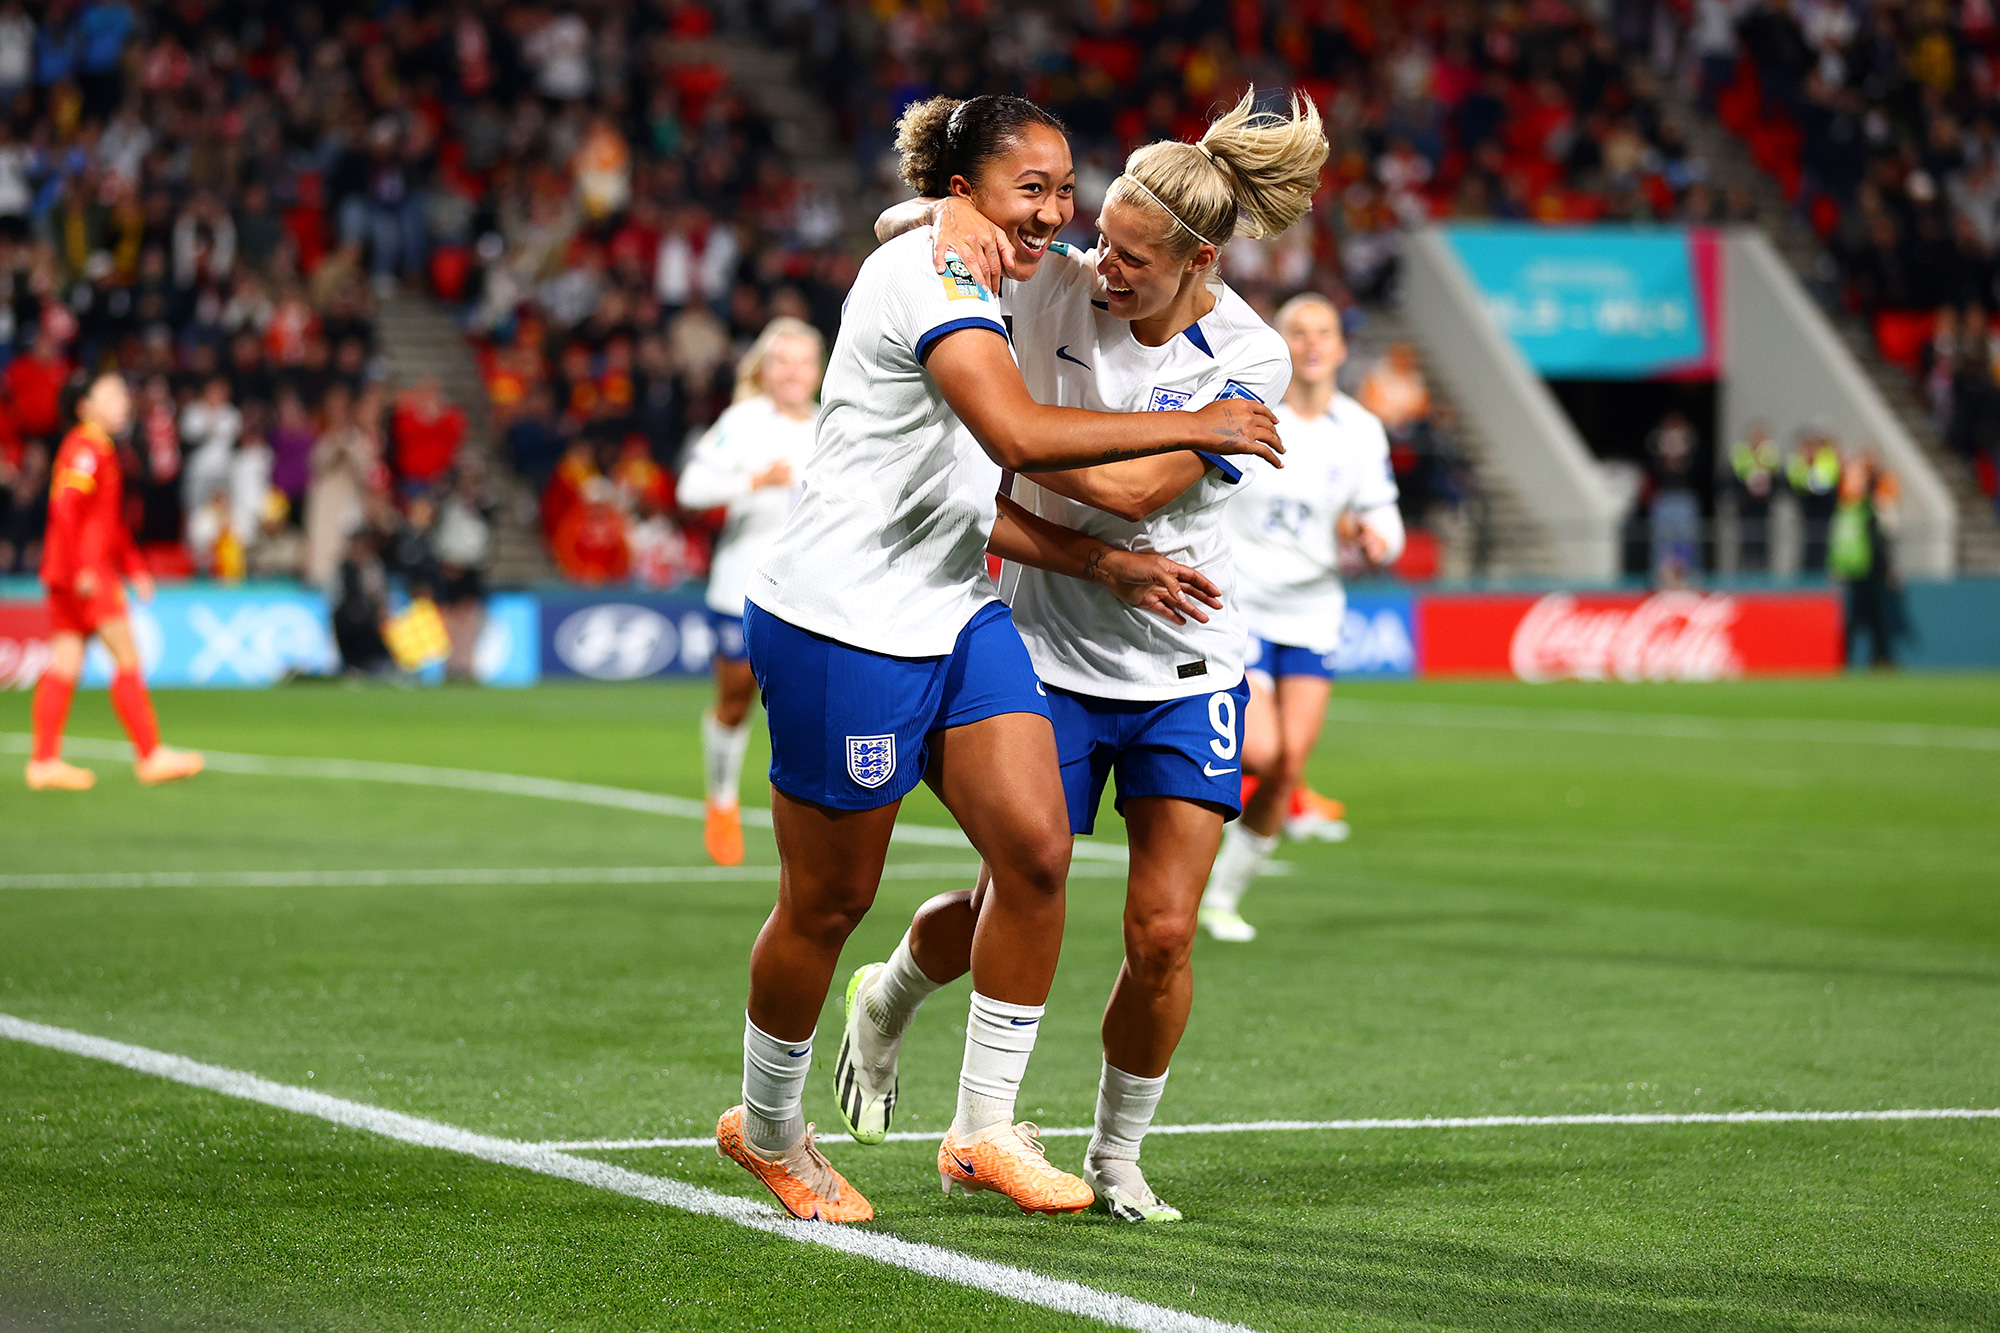 Lauren James of England, left, celebrates with teammate Rachel Daly after scoring her team's fourth goal.